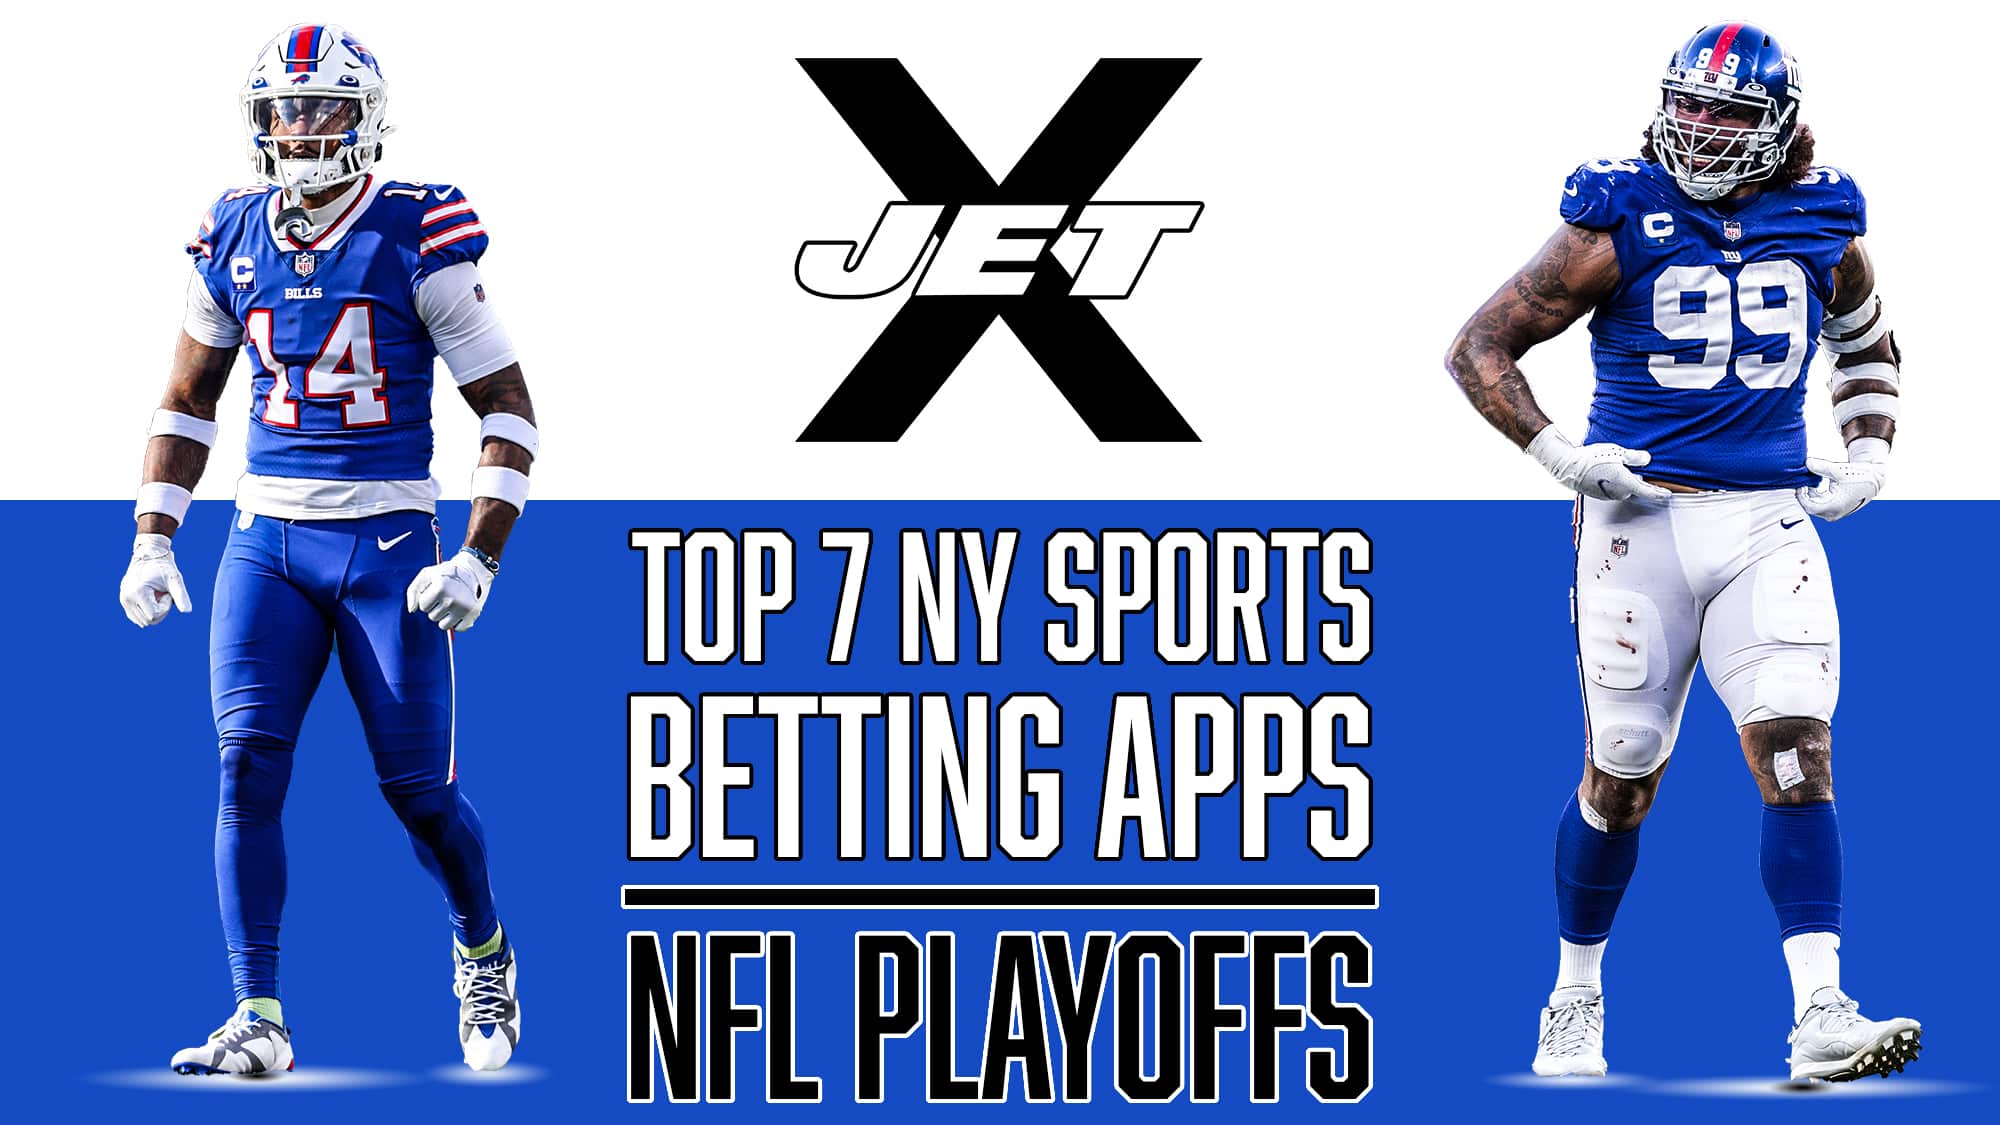 Top 7 NY Sports Betting Apps, Sportsbook Promos, NFL Playoffs, Stefon Diggs, Leonard Williams